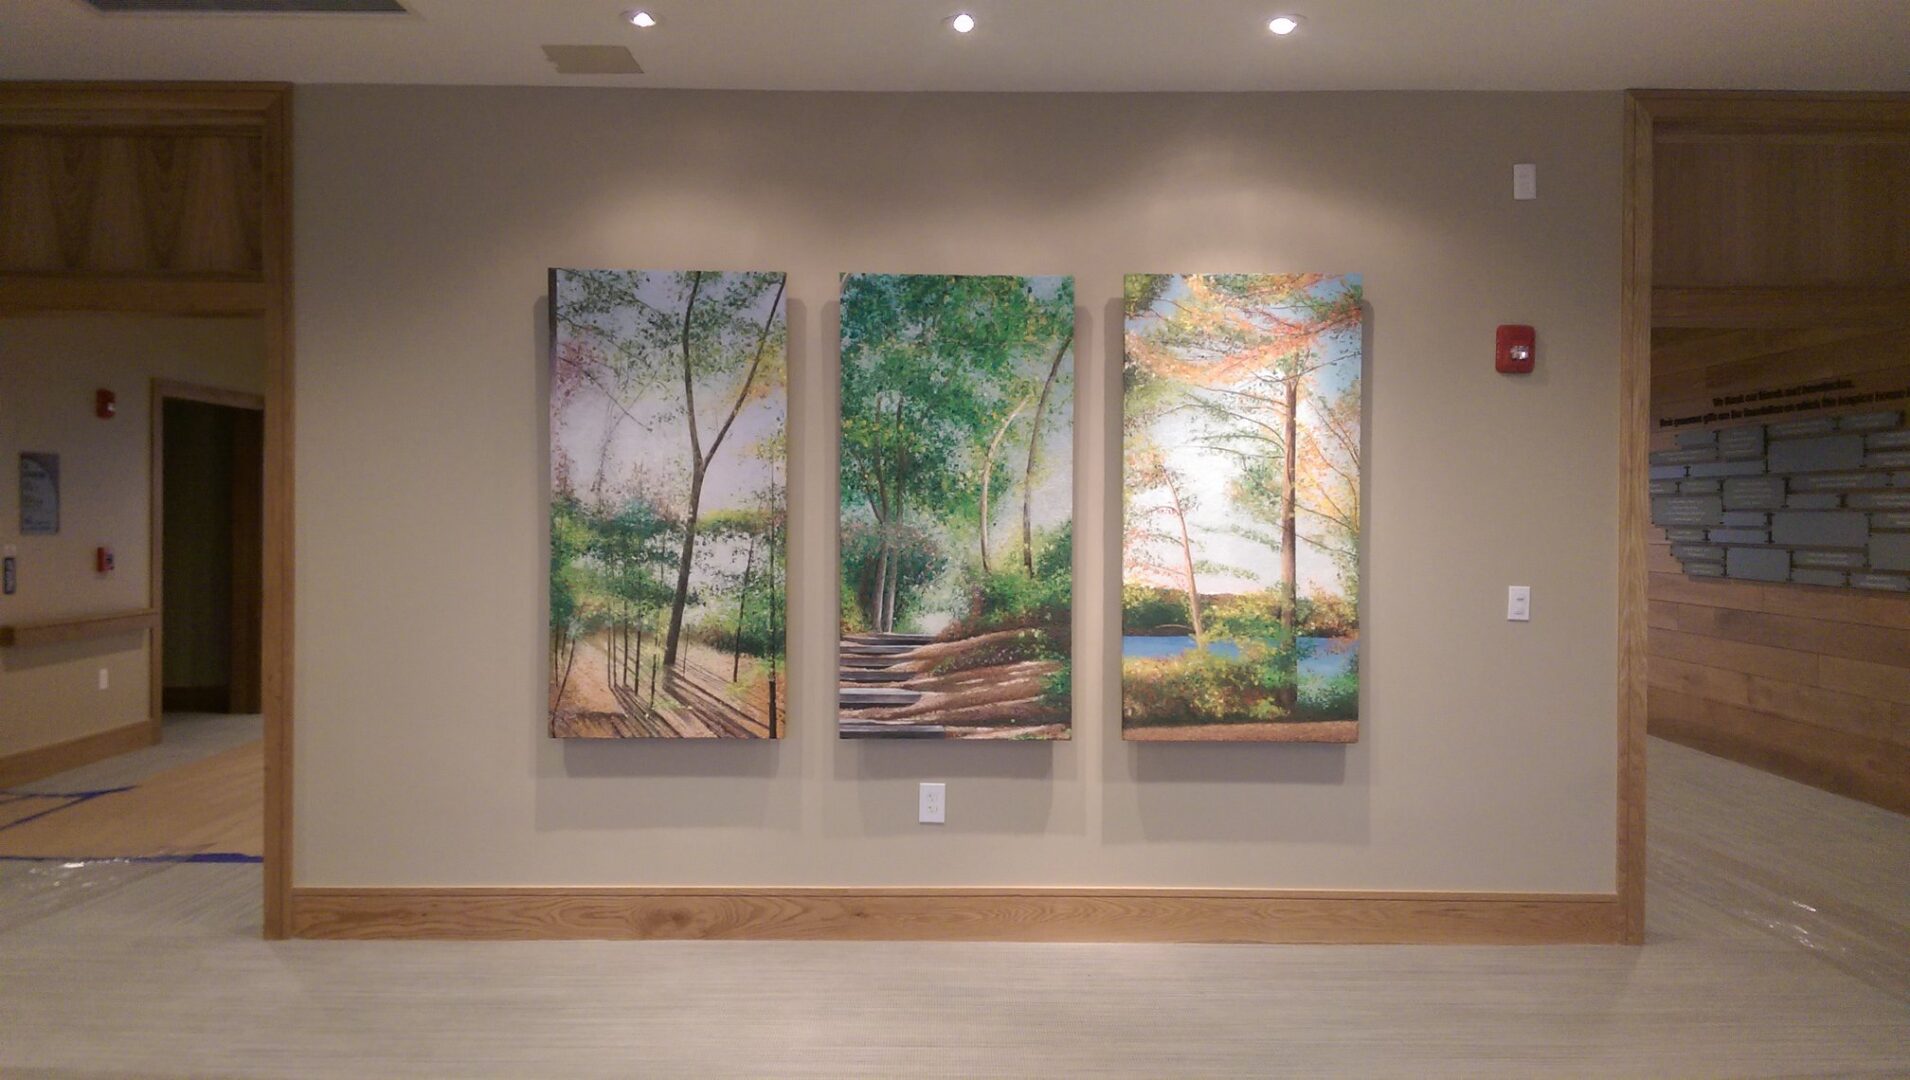 How Paintings tell a Story, triptych, 65 x 34 inches each. Care Dimensions, Lincoln, MA.